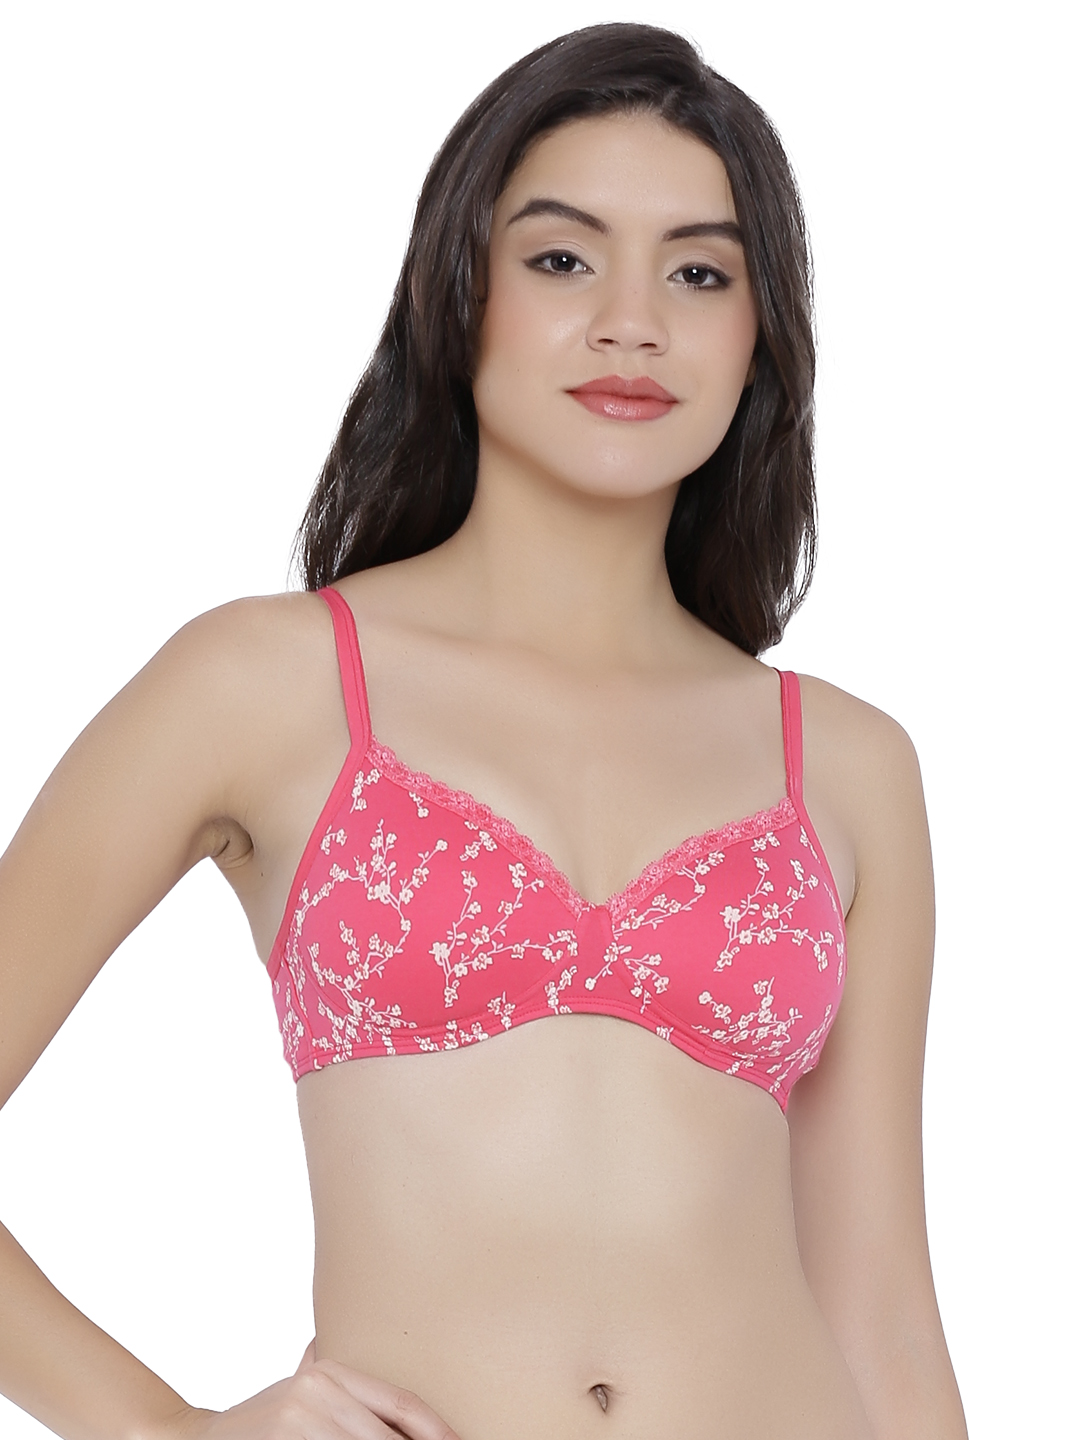 Amante Pink Full-Coverage Floral Print T-shirt Bra BFCV32 Price in India